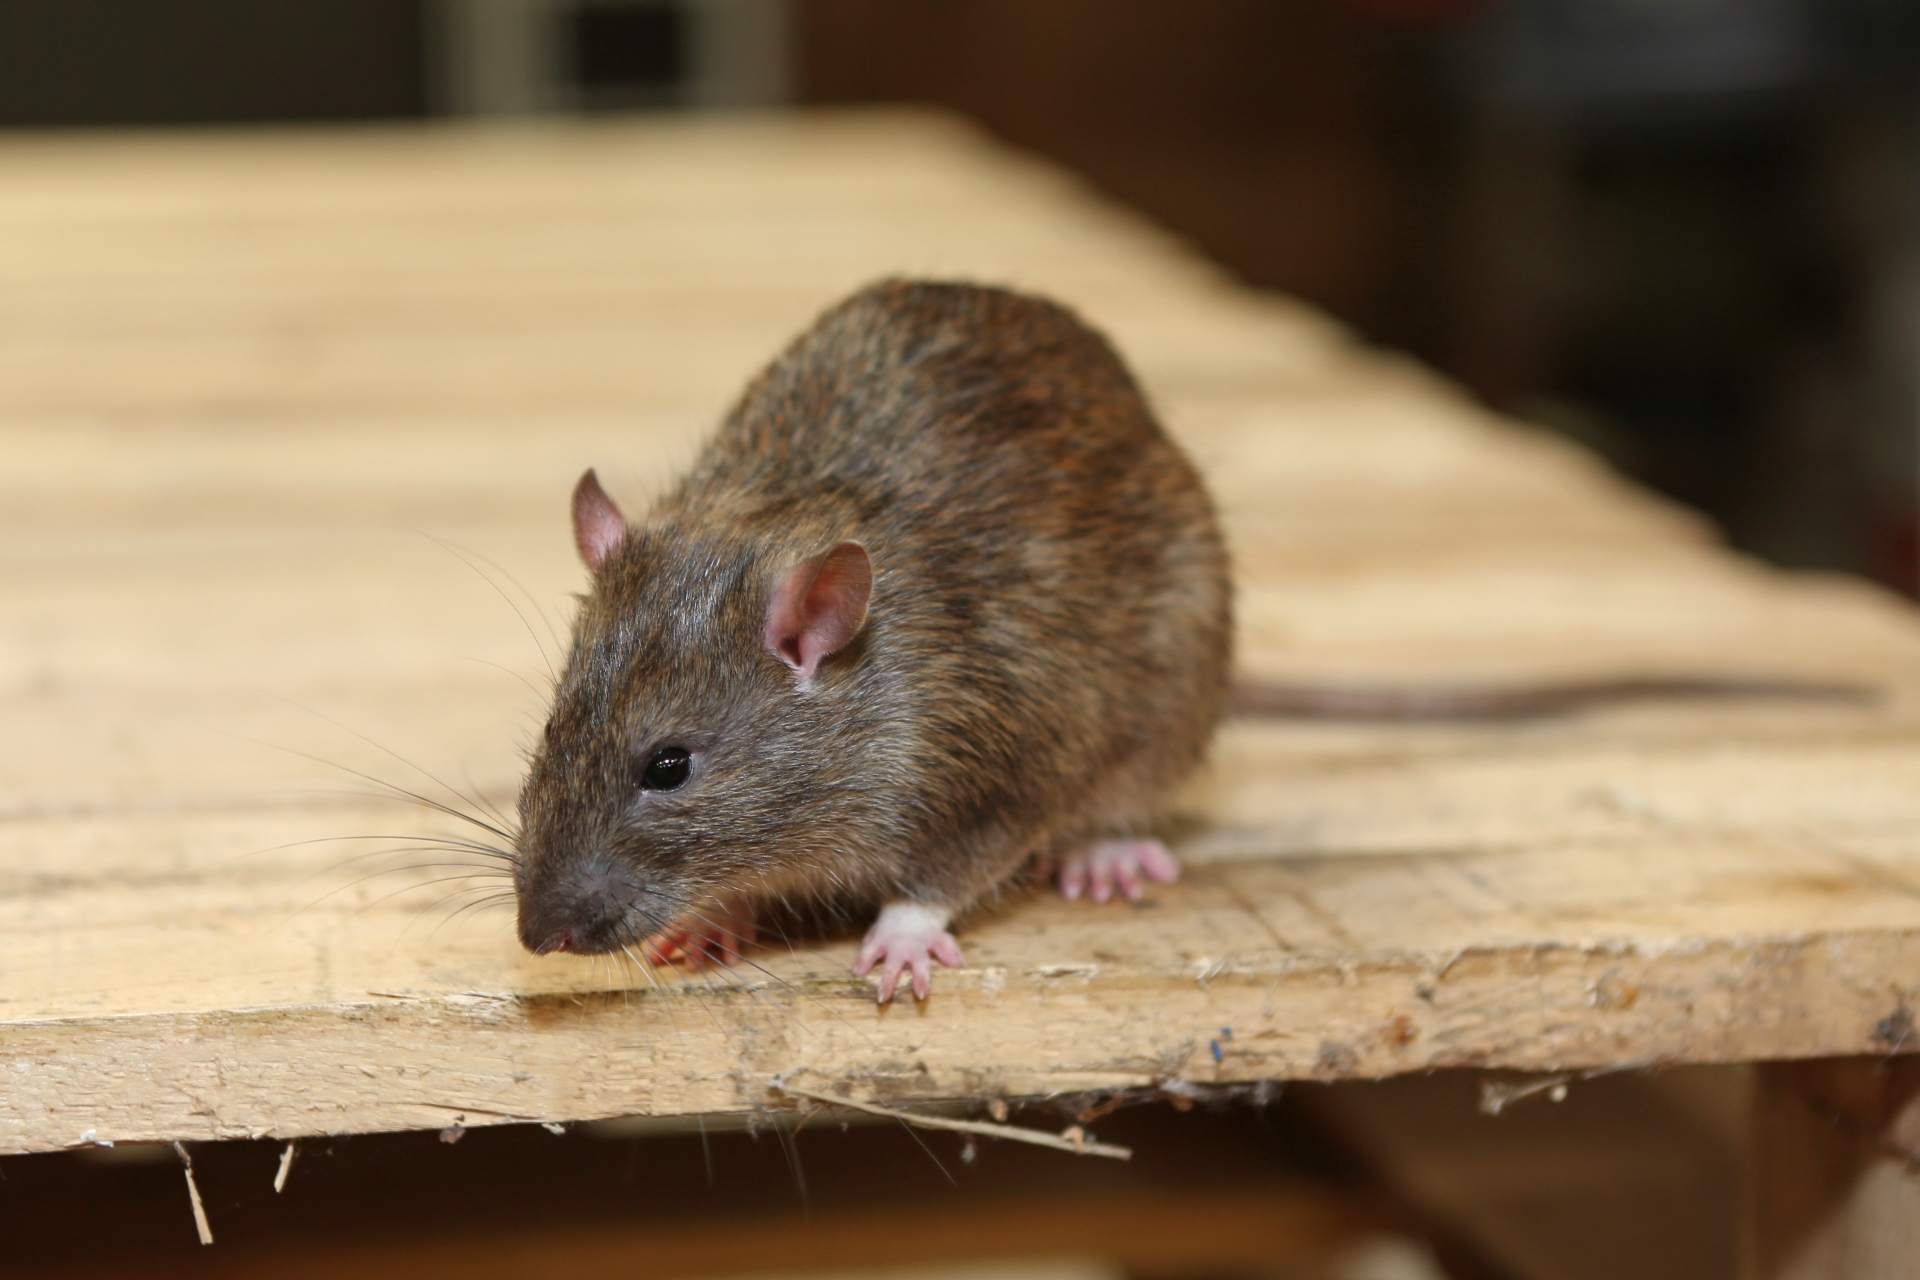 Rat Infestation, Pest Control in Stamford Hill, Stoke Newington, N16. Call Now 020 8166 9746